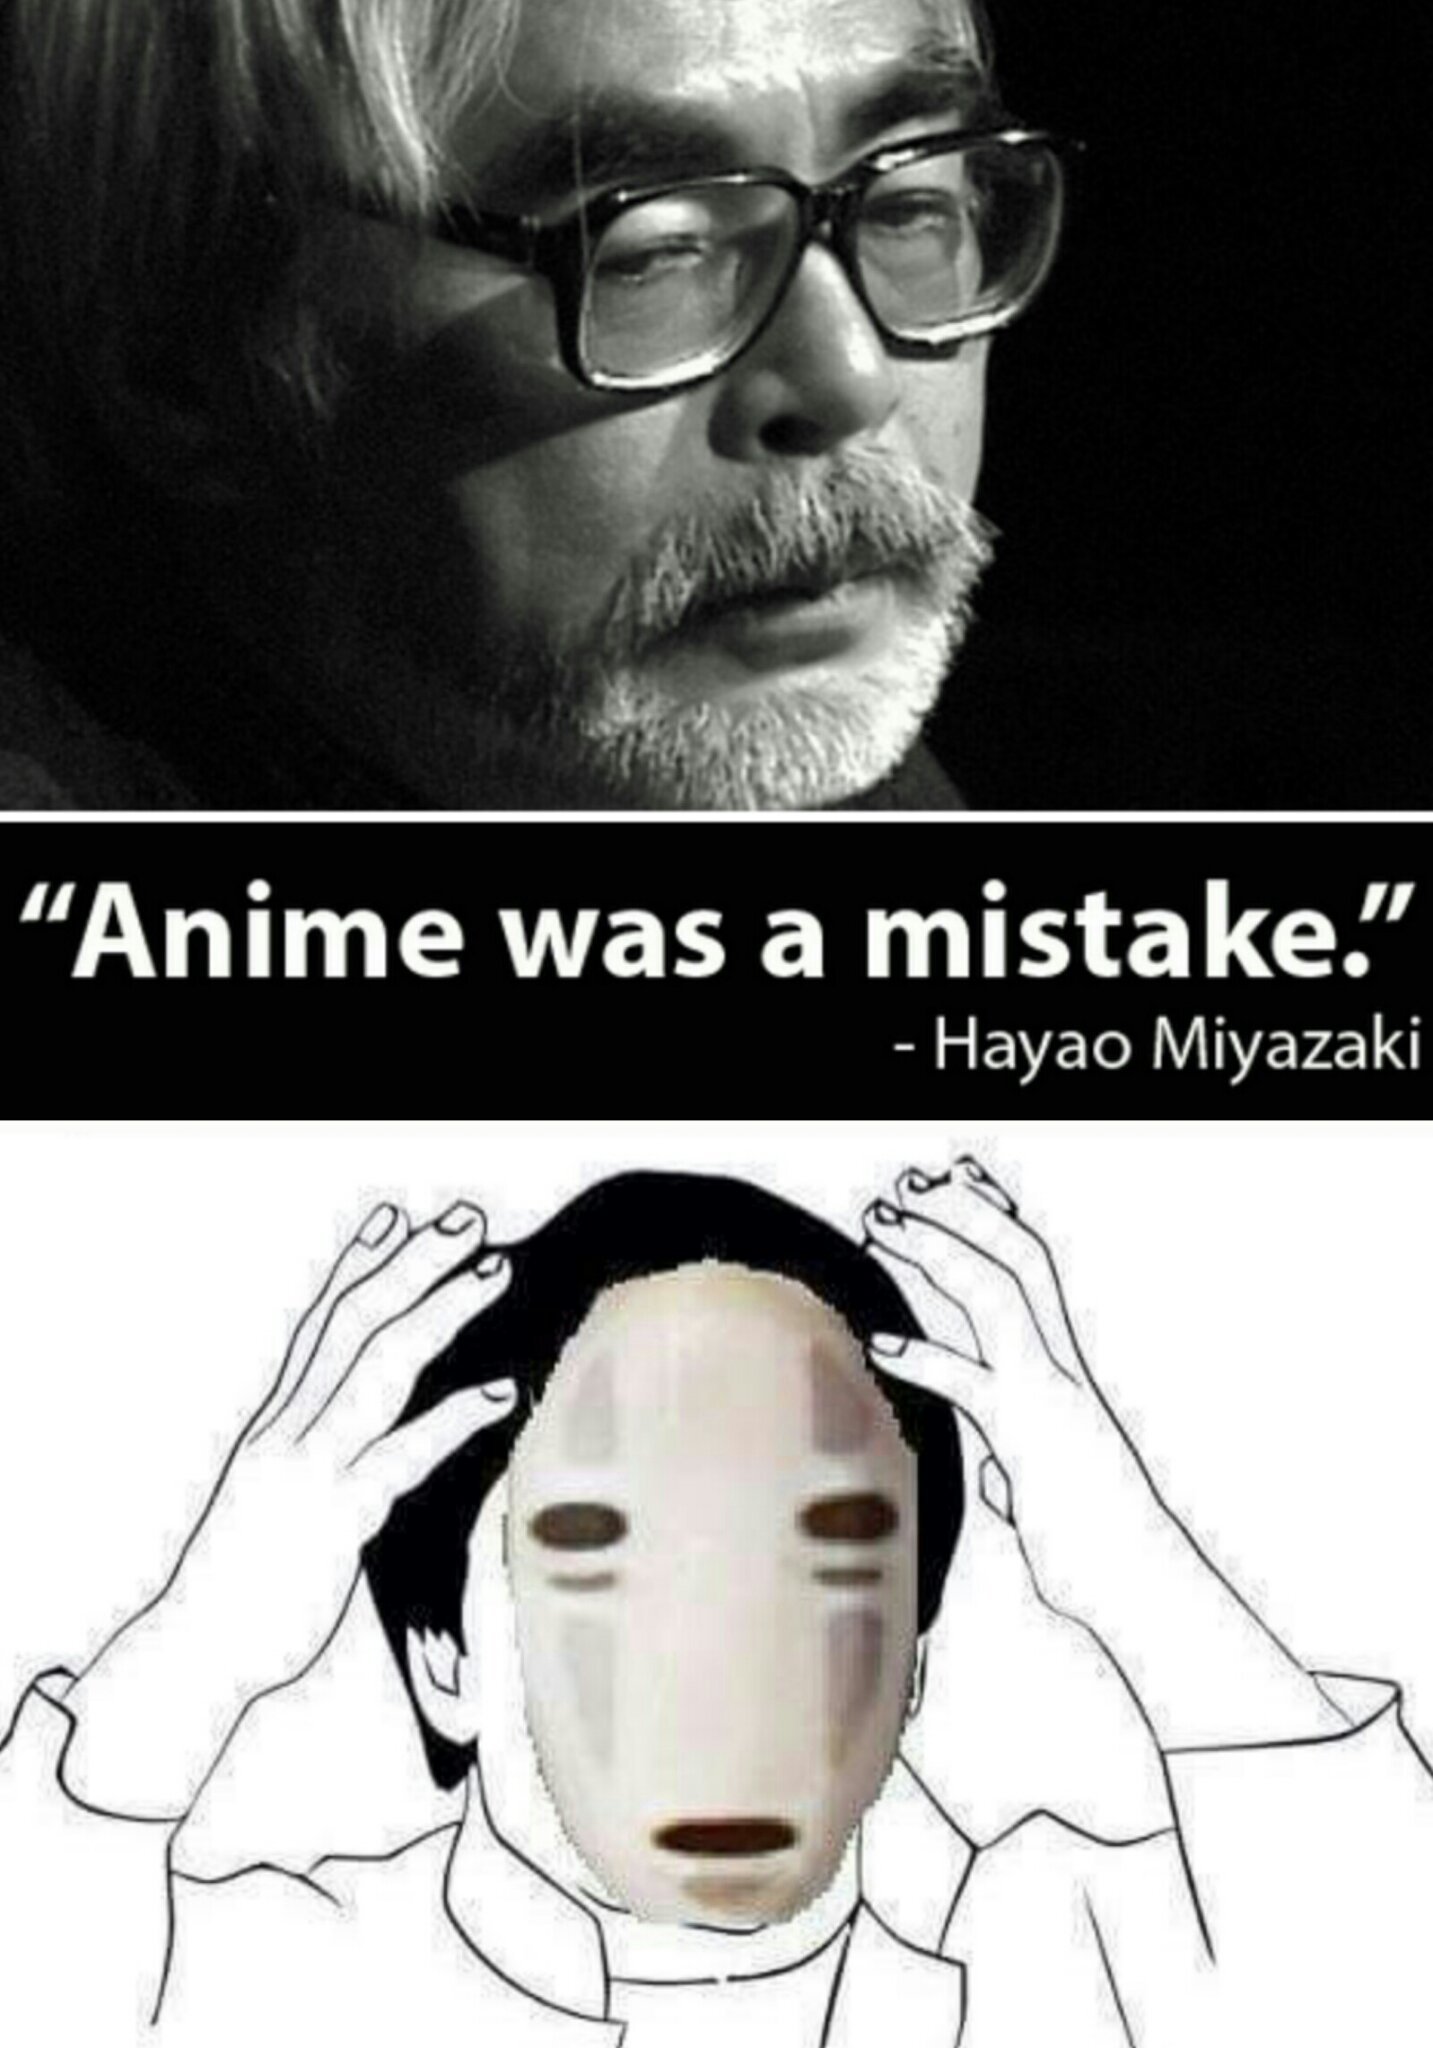 Lets a game for anime haters. Comment a reason why you hate anime in the  comment section. - Meme by Kingzieh_Yeager :) Memedroid